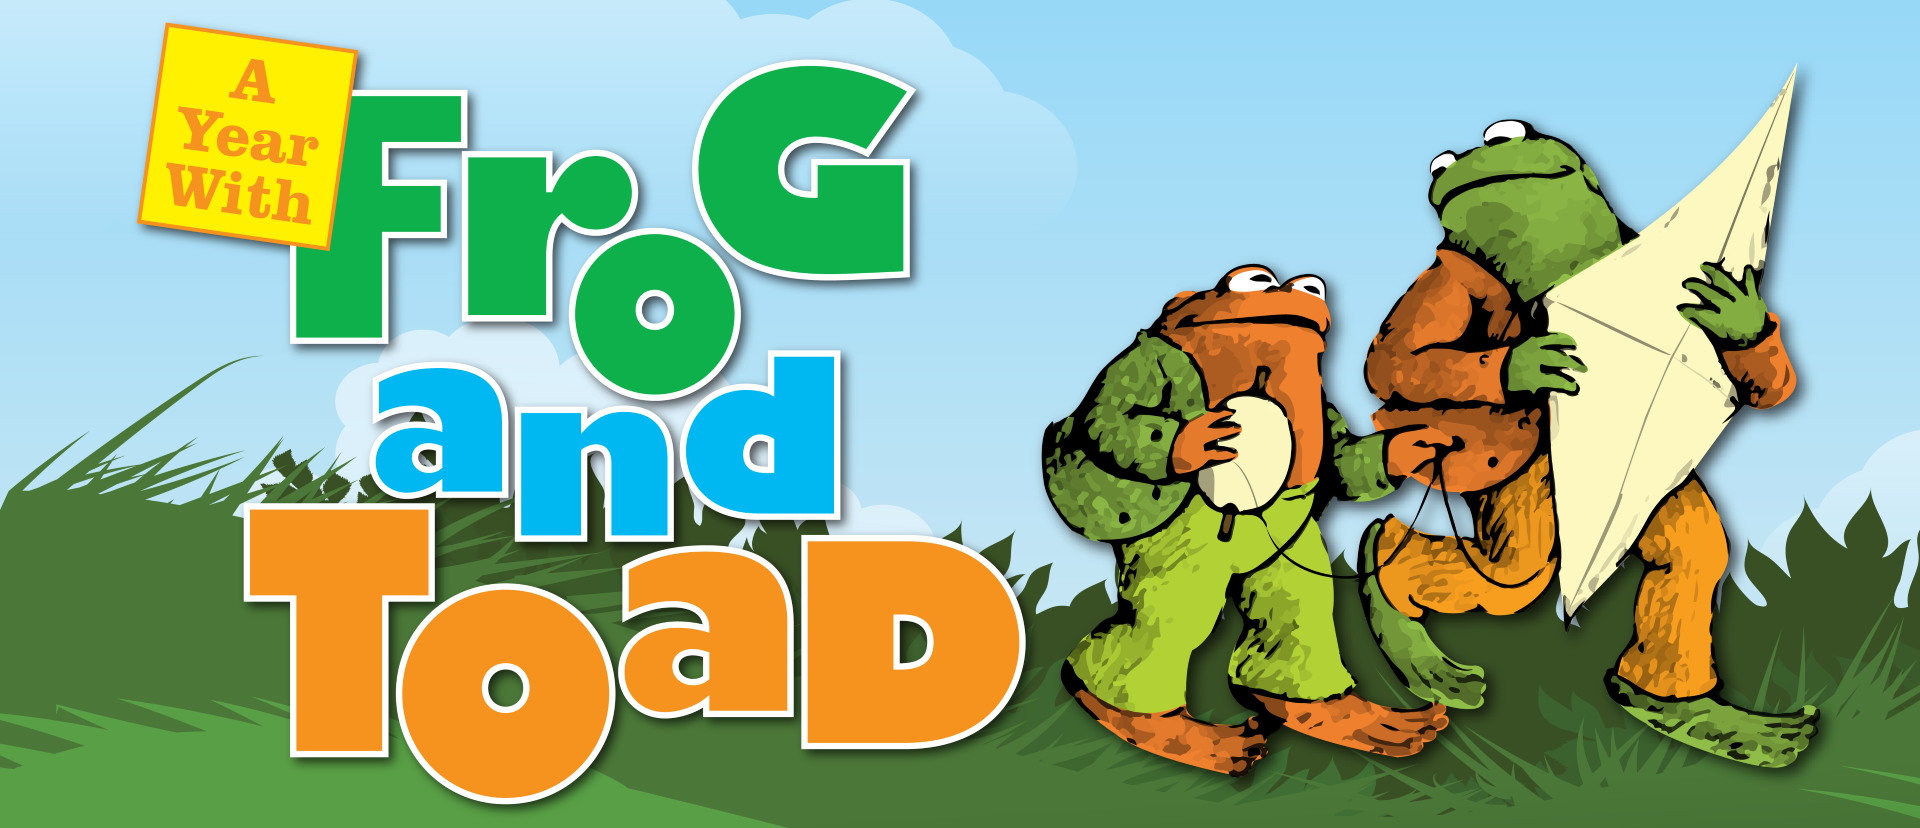 A Year With Frog and Toad Header